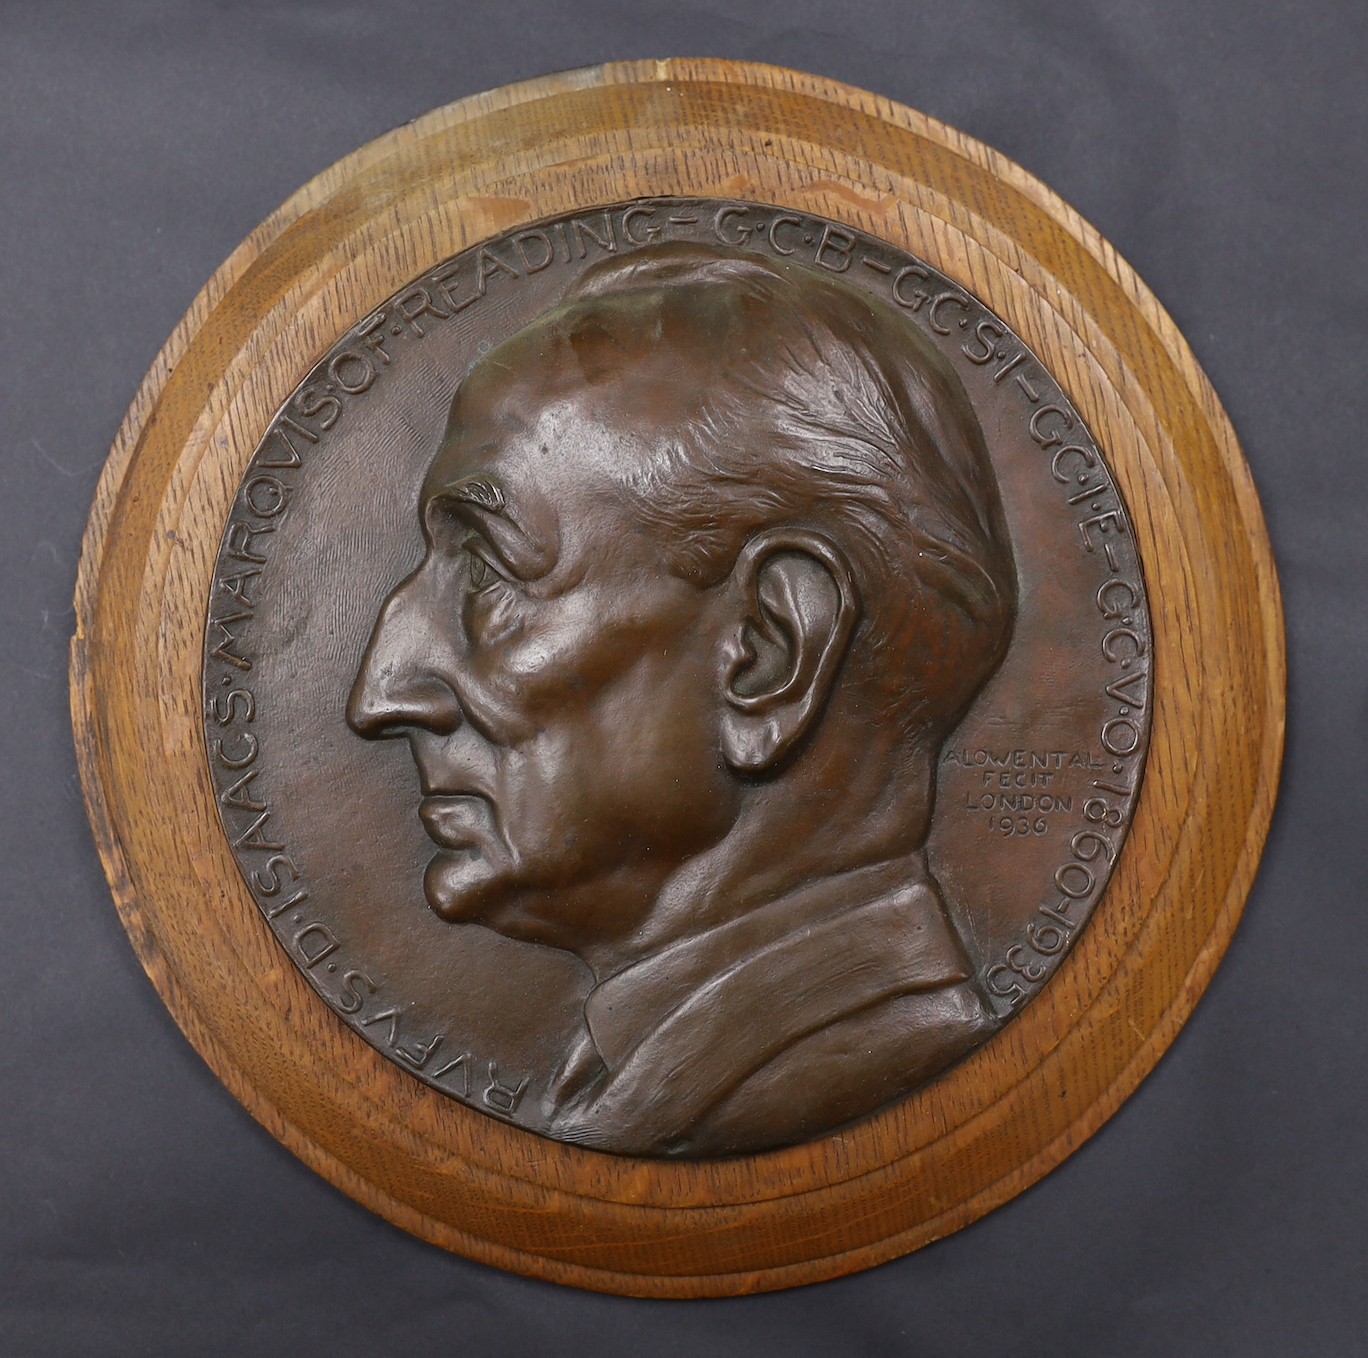 A large bronze relief medal plaque of Rufus Daniel Isaacs, 1st Marquess of Reading, 1936, by Arthur Immanuel Lowenthal.